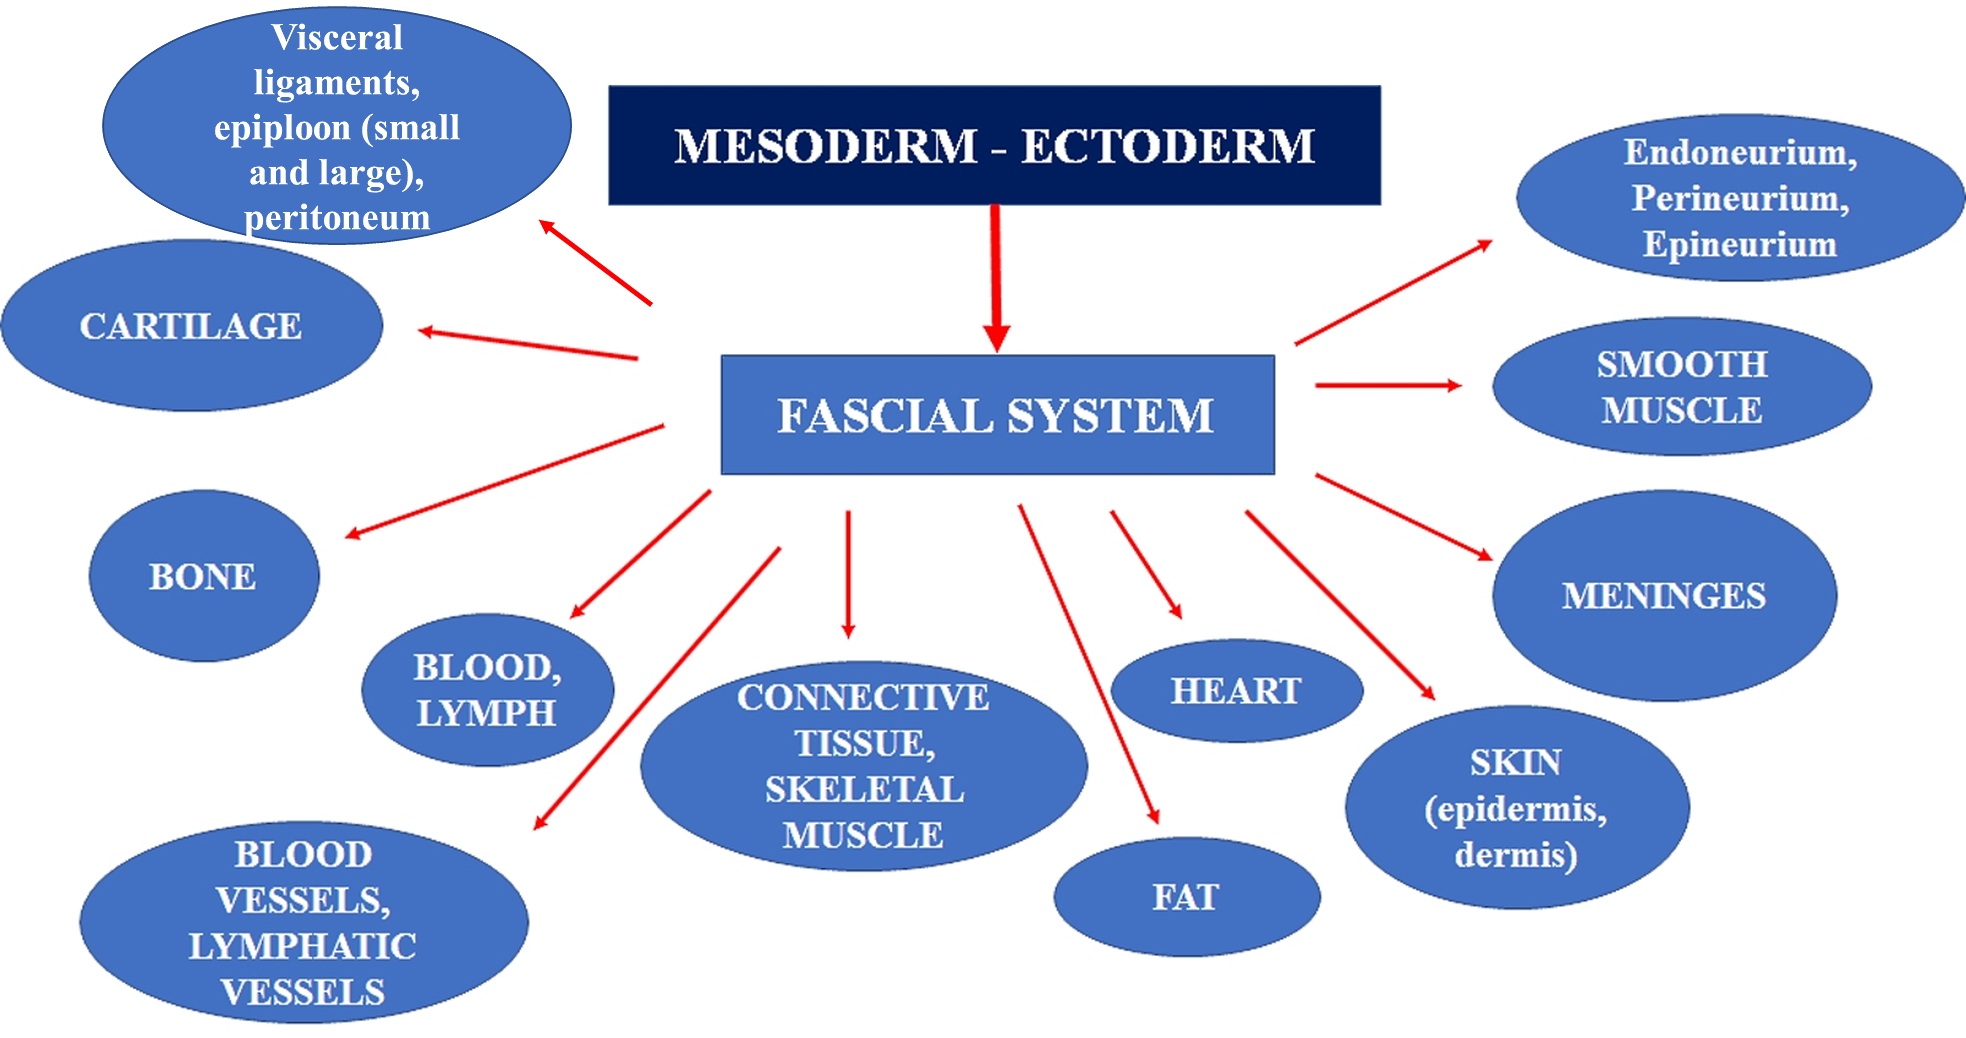 From embryology we can determine what should be considered fascial tissue.